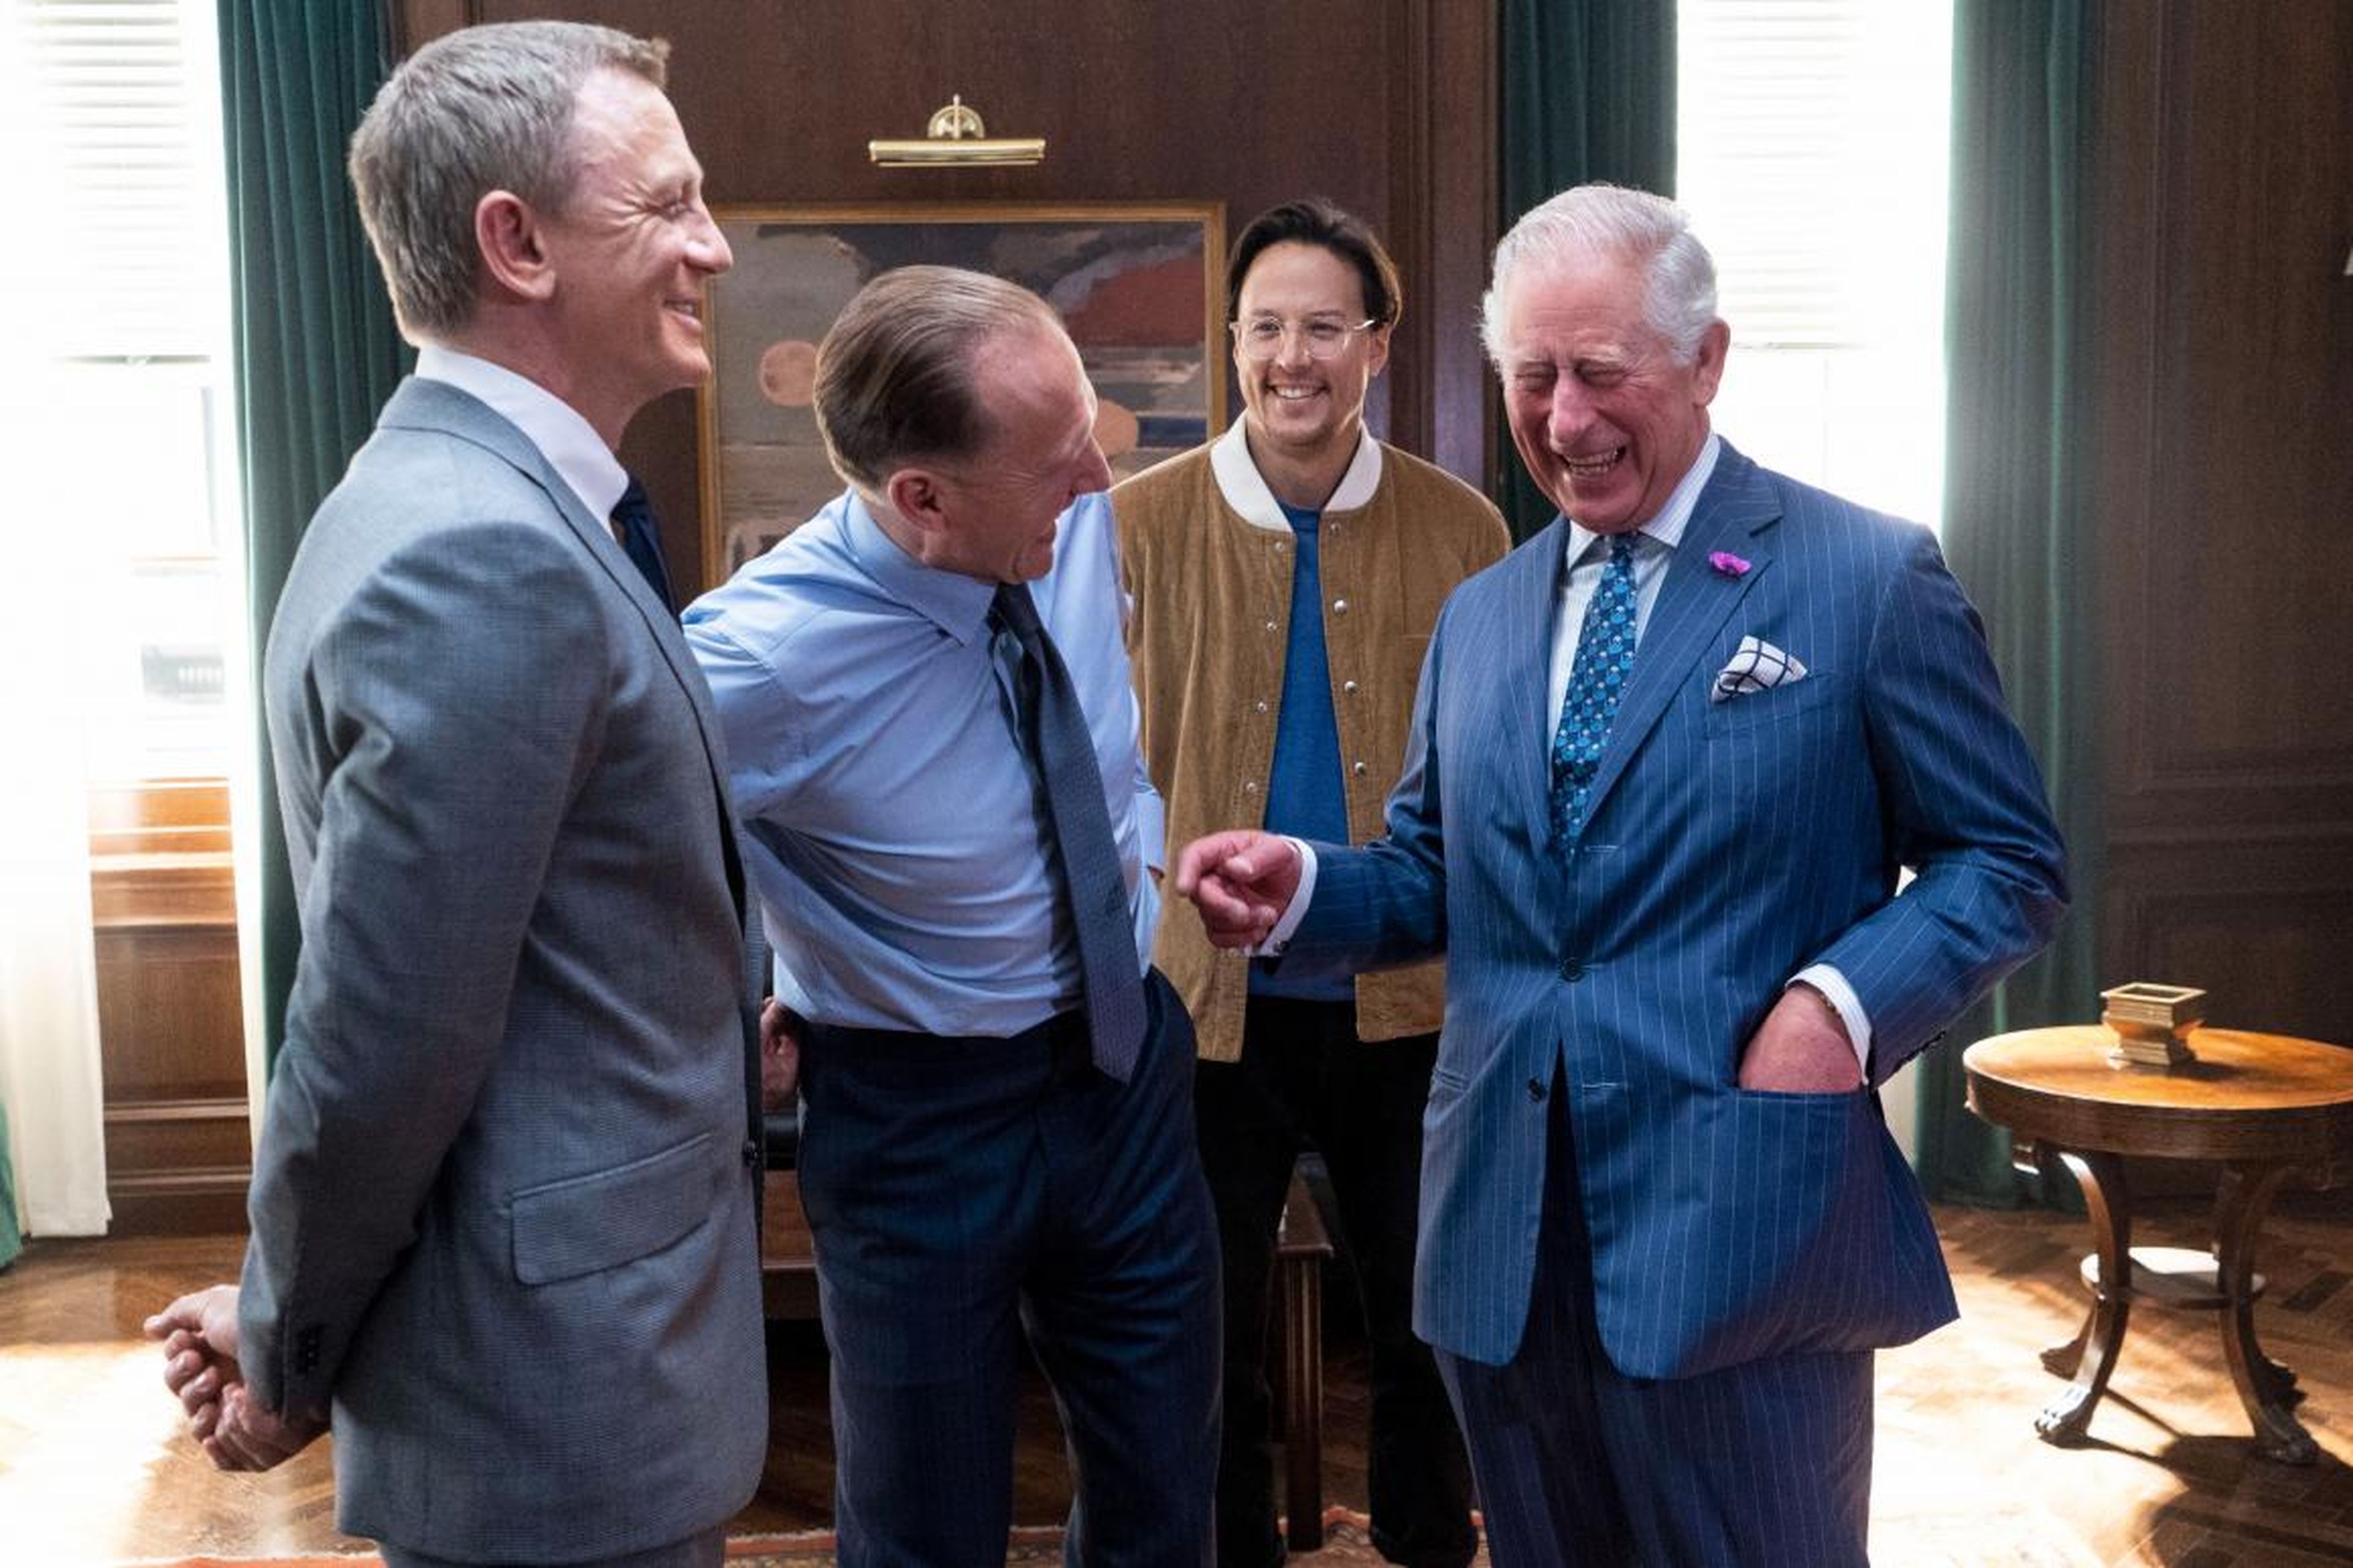 Prince Charles has a laugh on the set of "James Bond."